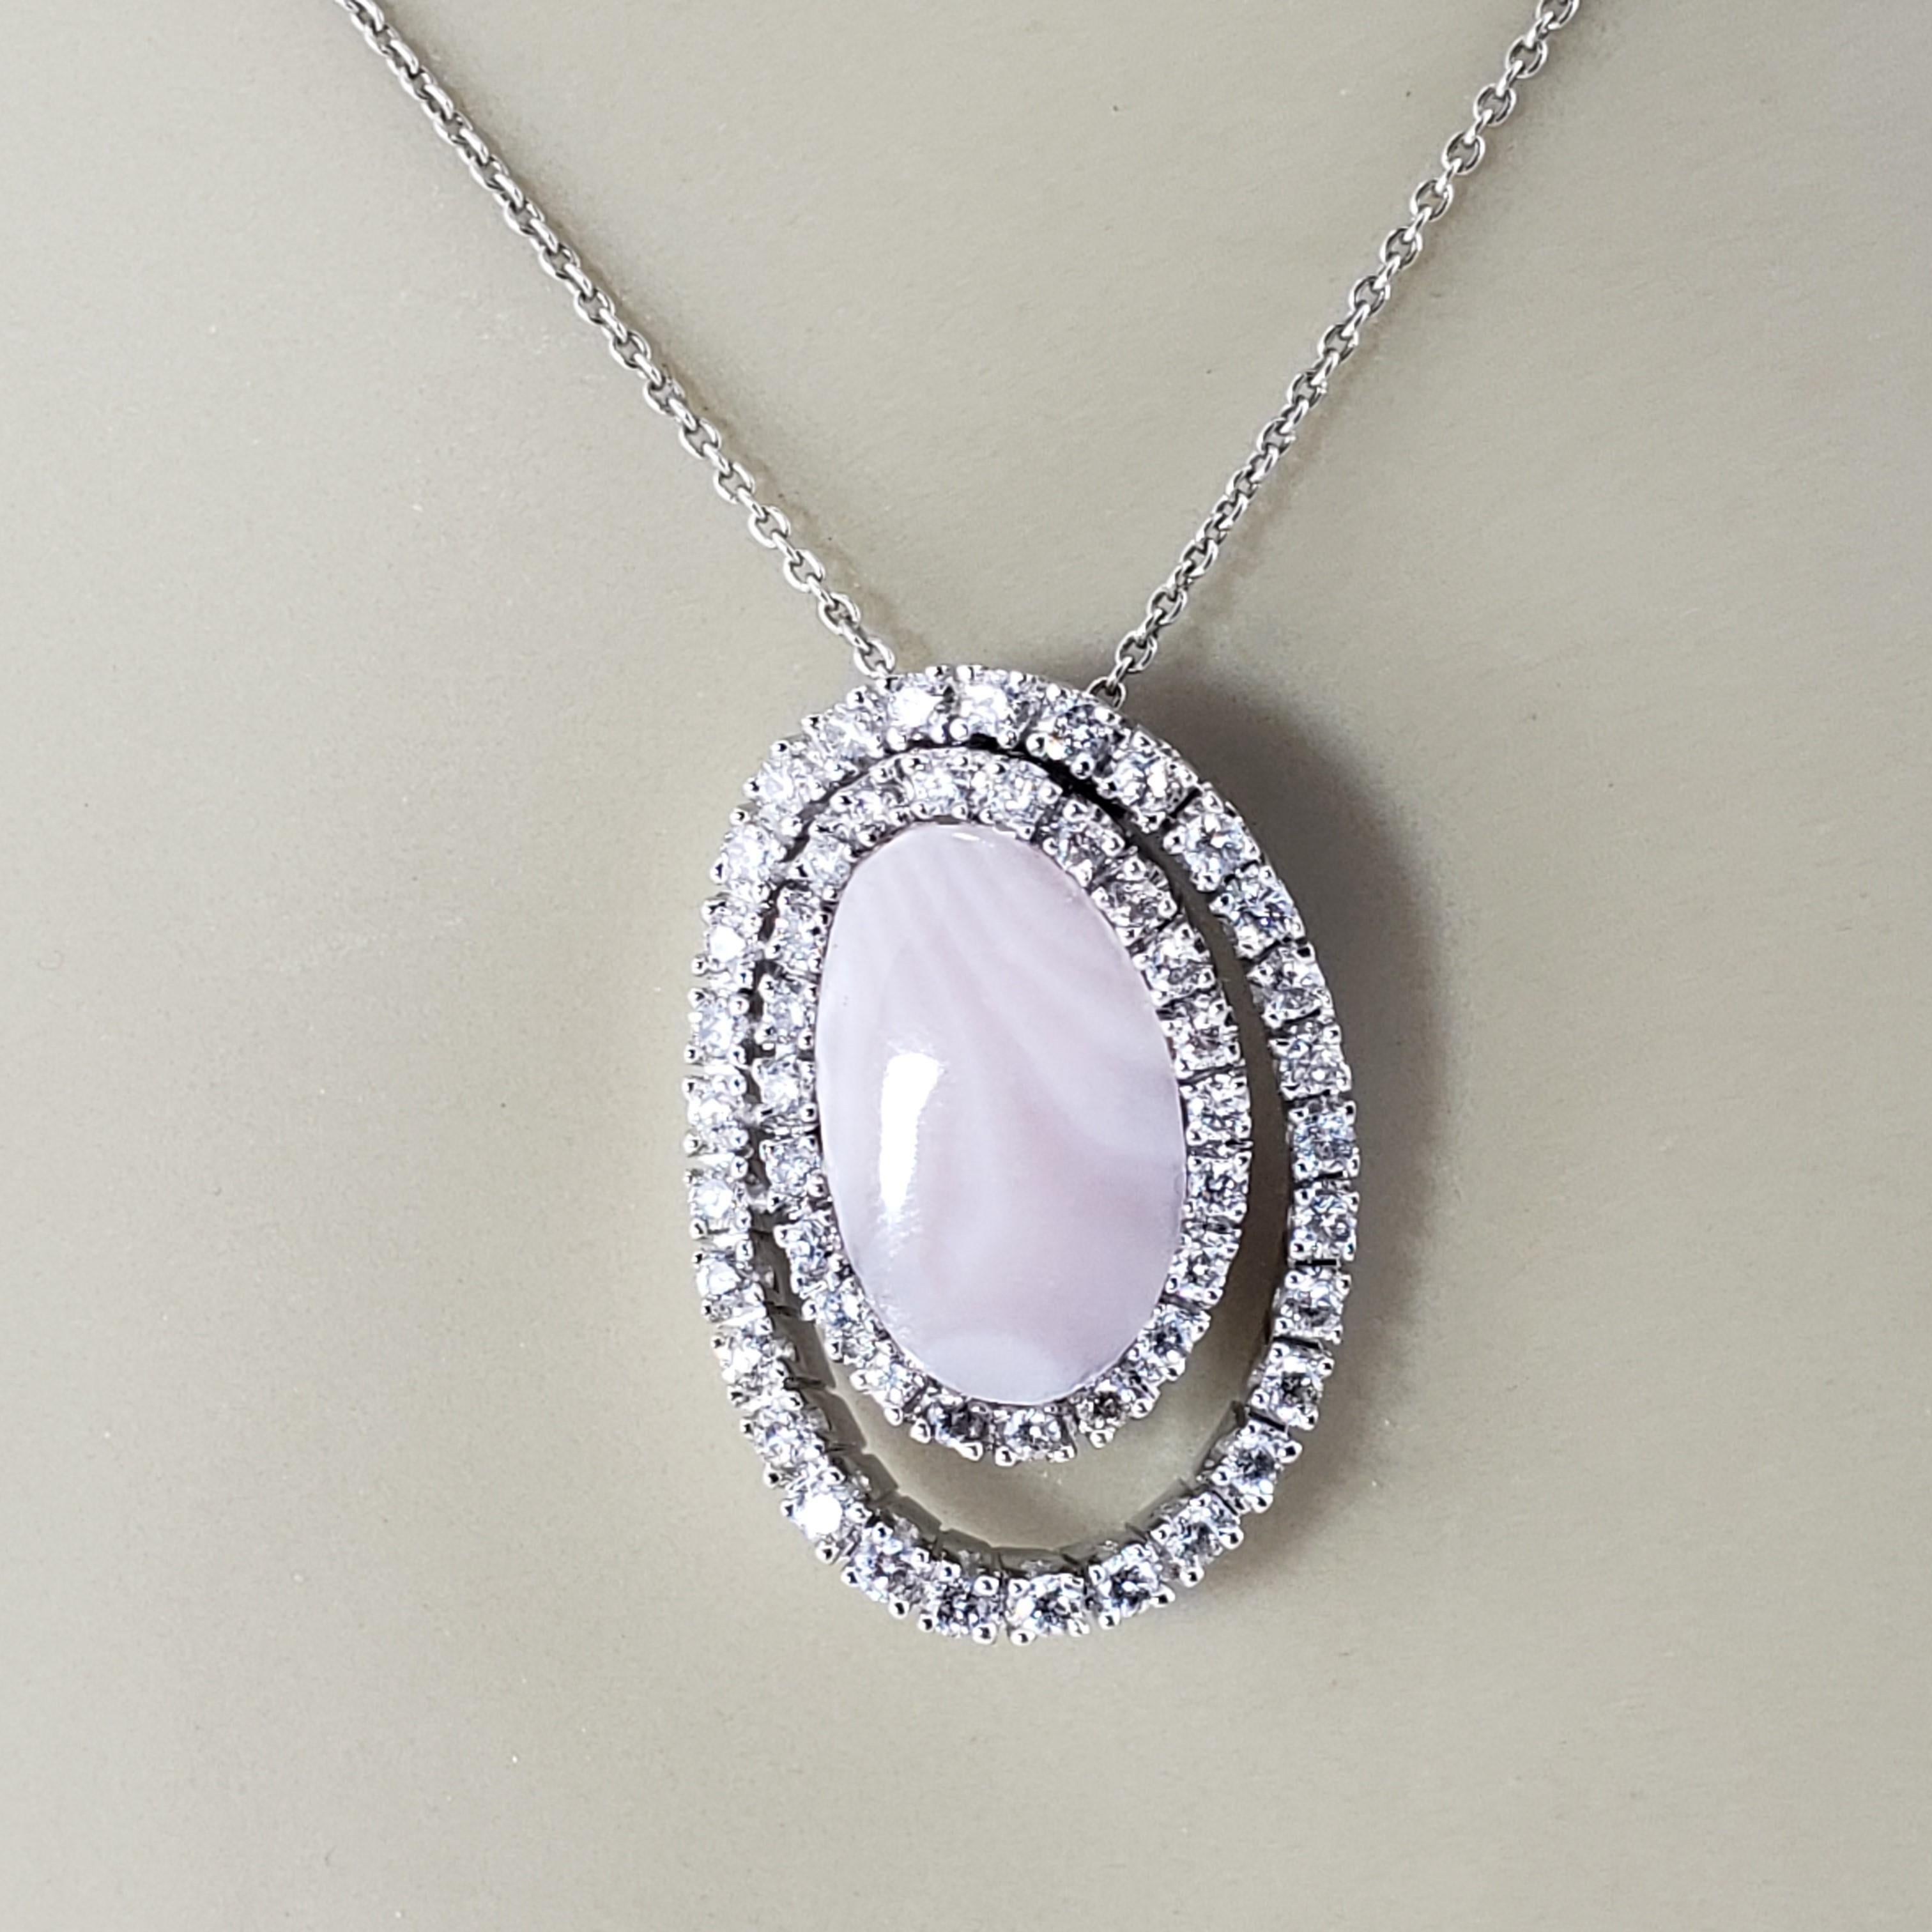 14K White Gold Mother of Pearl & Diamond Pendant #15766 For Sale 3